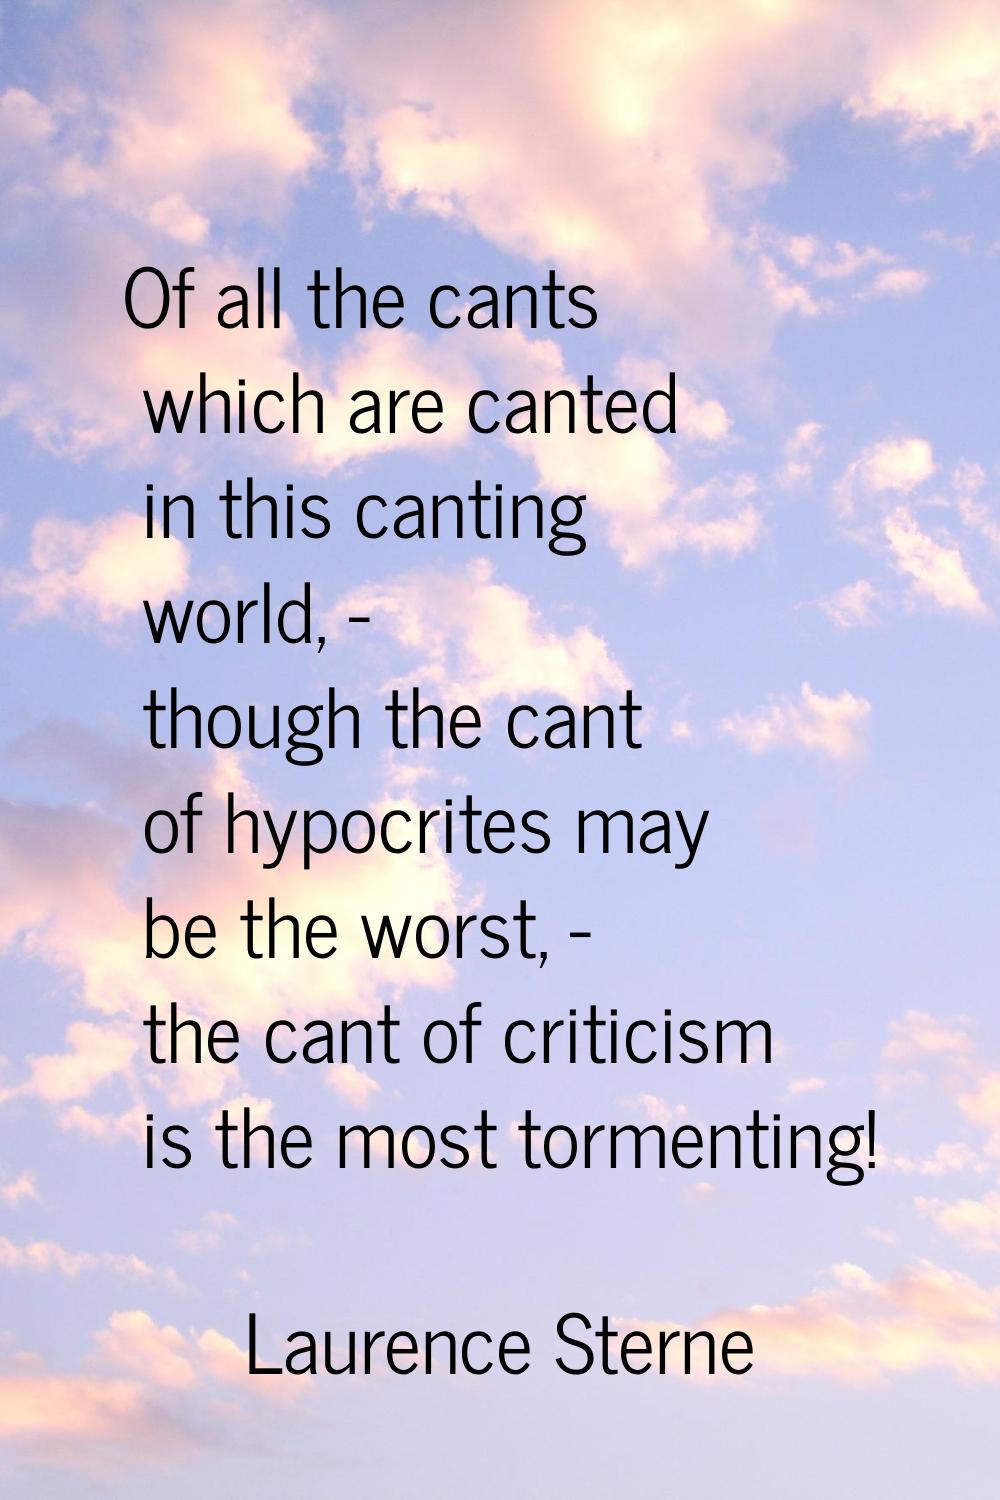 Of all the cants which are canted in this canting world, - though the cant of hypocrites may be the